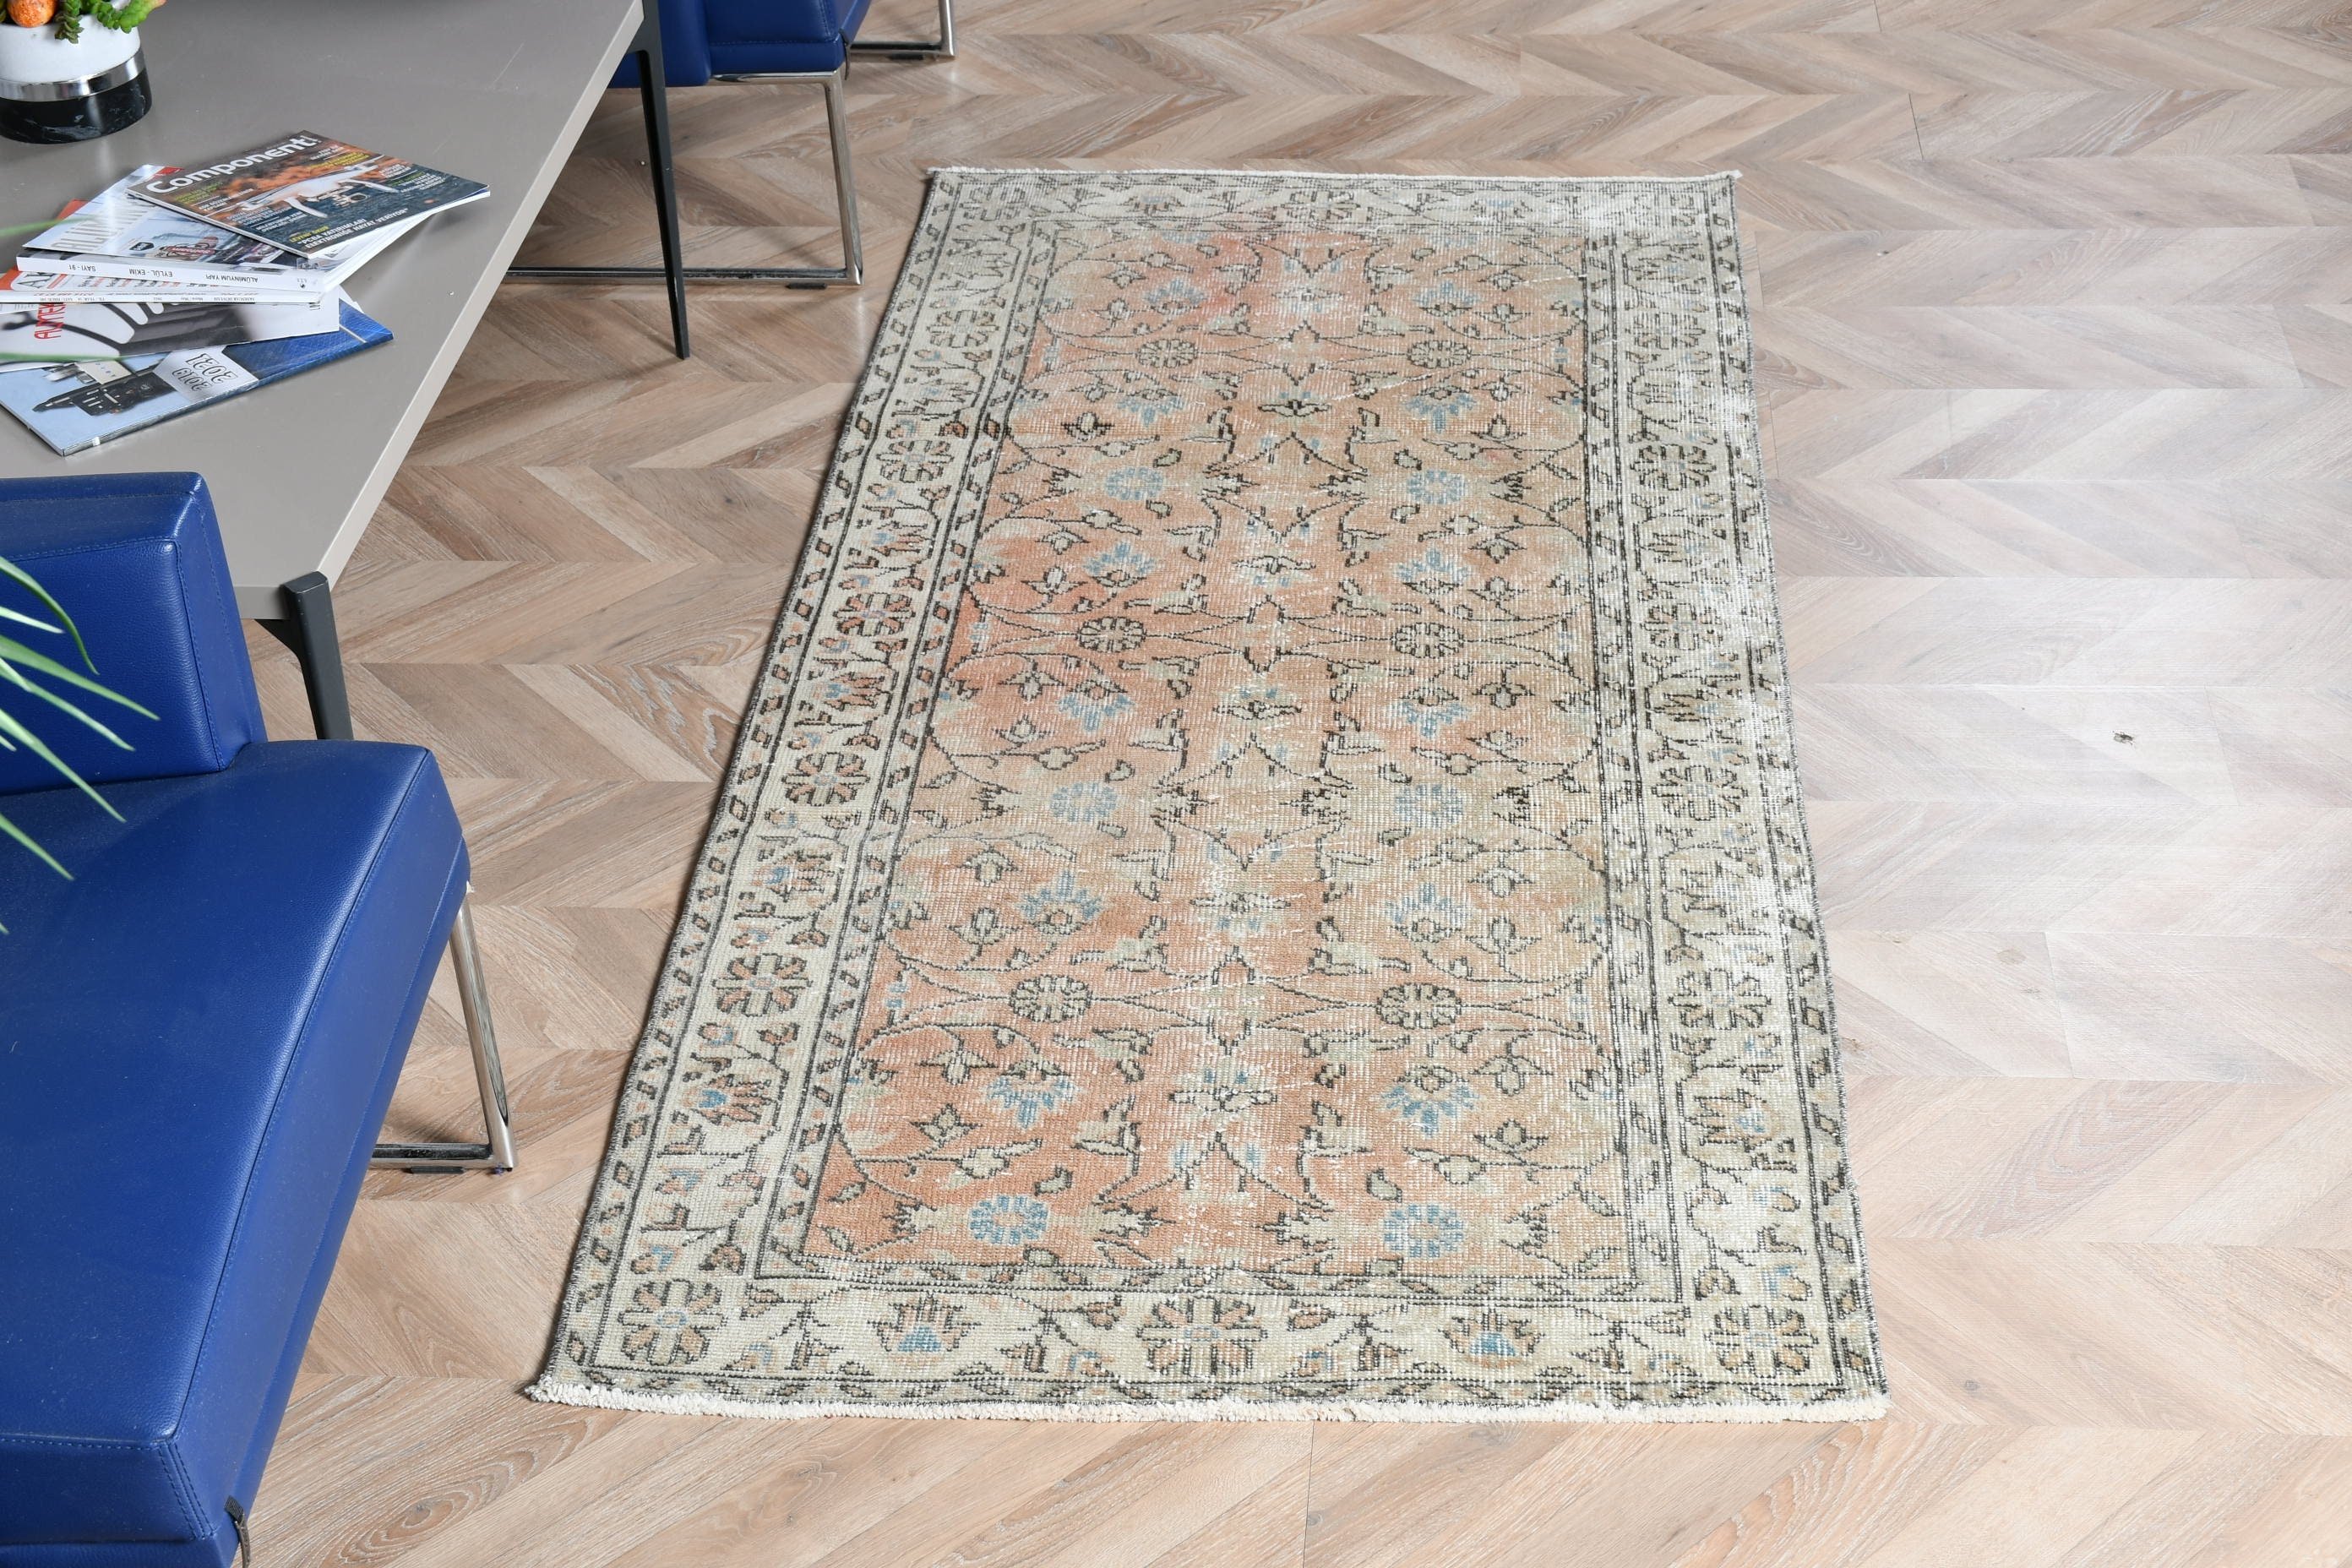 Turkish Rugs, Vintage Rug, Kitchen Rugs, Entry Rug, Wool Rug, Brown Home Decor Rug, Bedroom Rug, 3.1x6.7 ft Accent Rug, Rugs for Entry